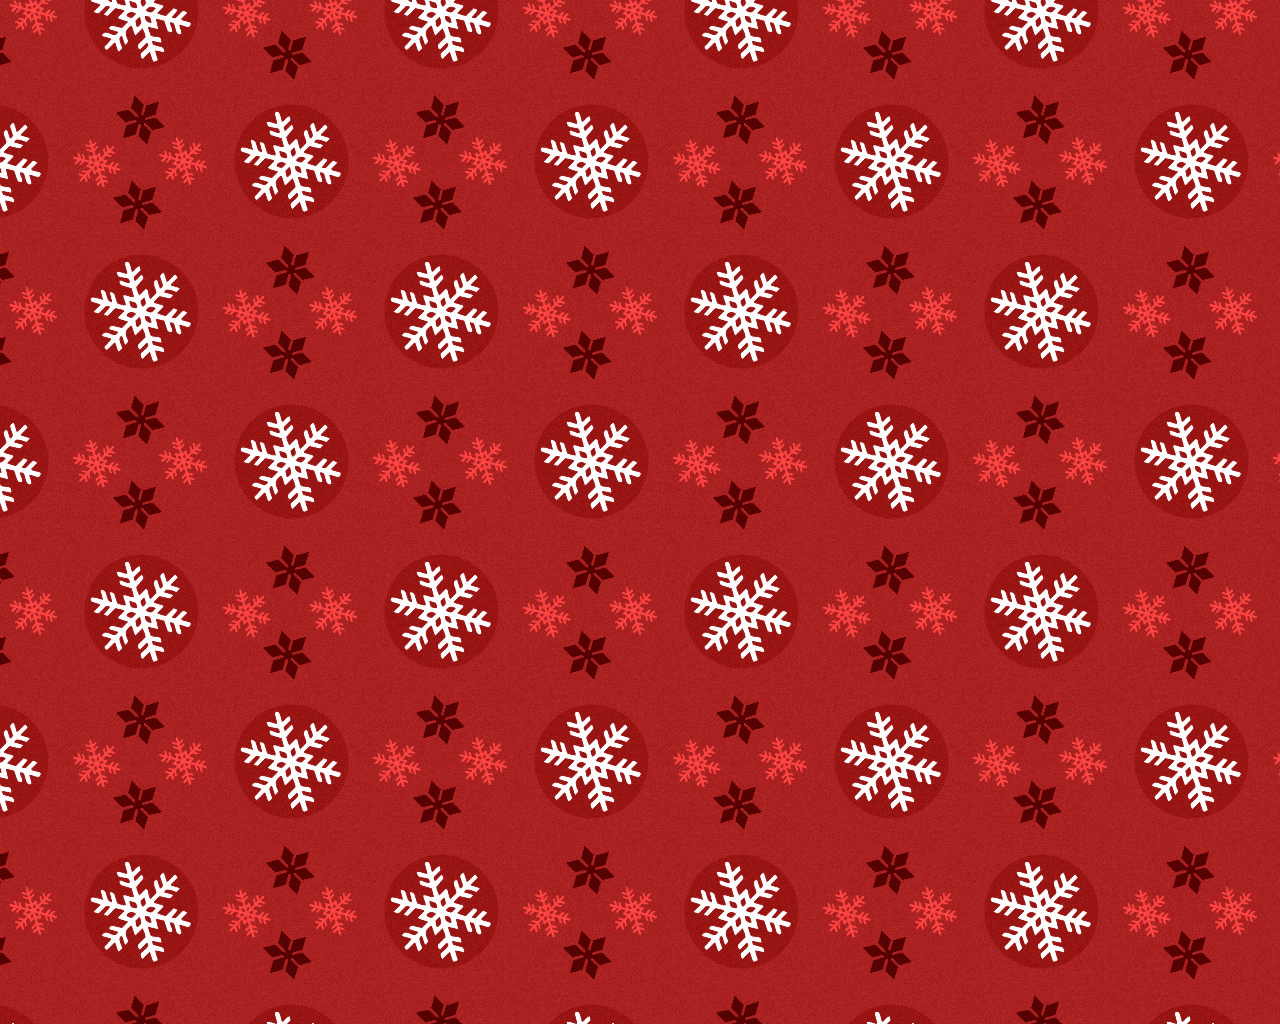 75637 Christmas Wallpaper Stock Photos HighRes Pictures and Images   Getty Images